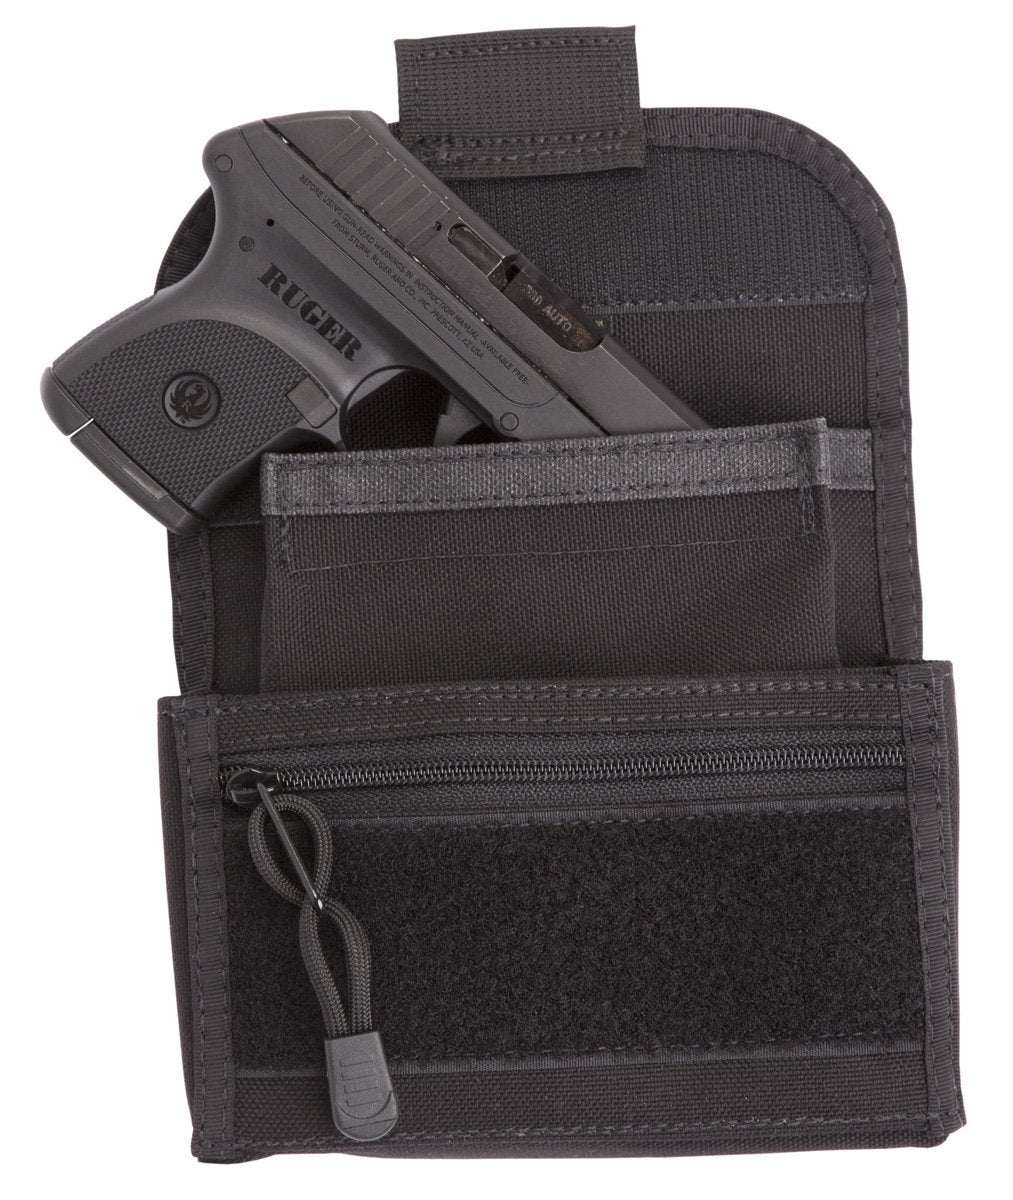 Should You Have a Concealed Carry Pack? - USA Carry